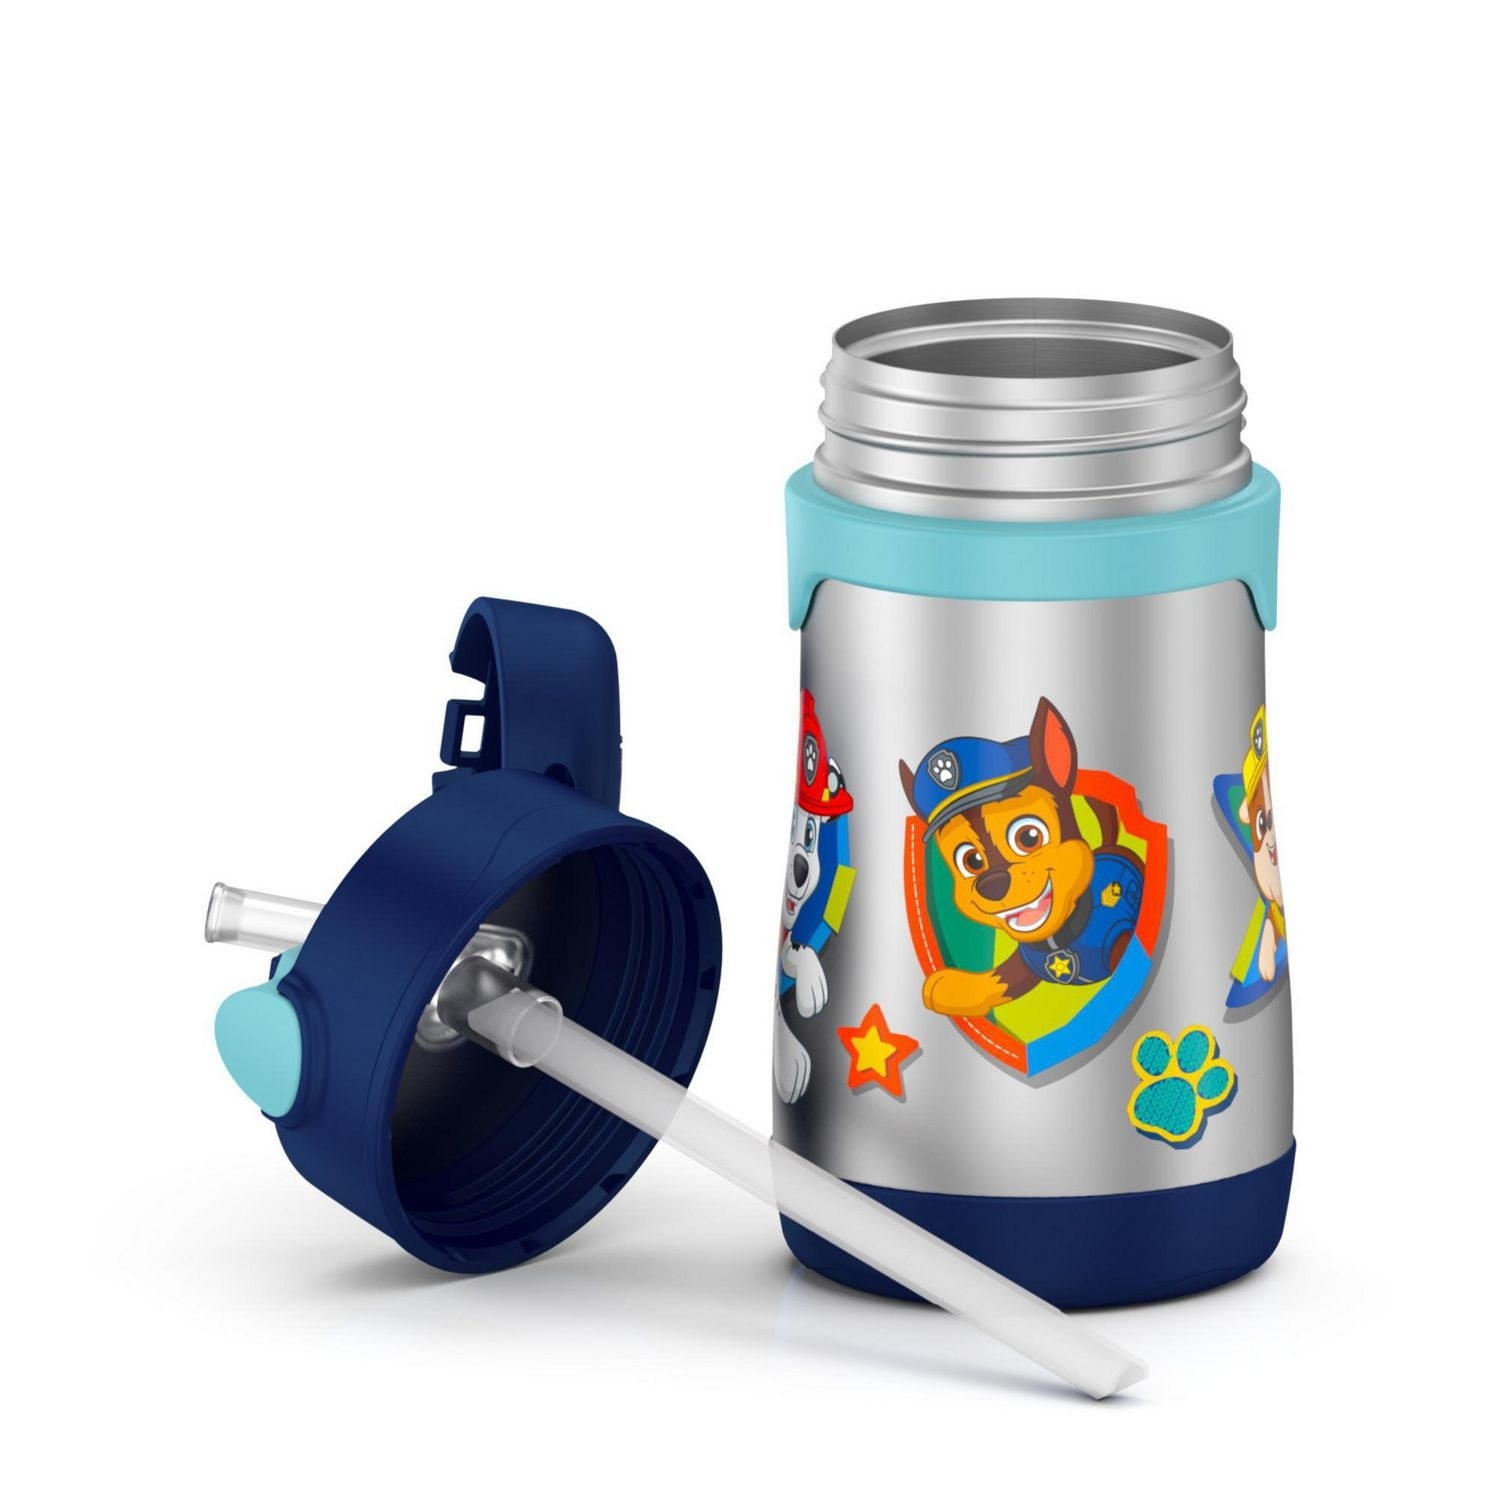 A thermos with Paw Patrol characters on it in silver and blue